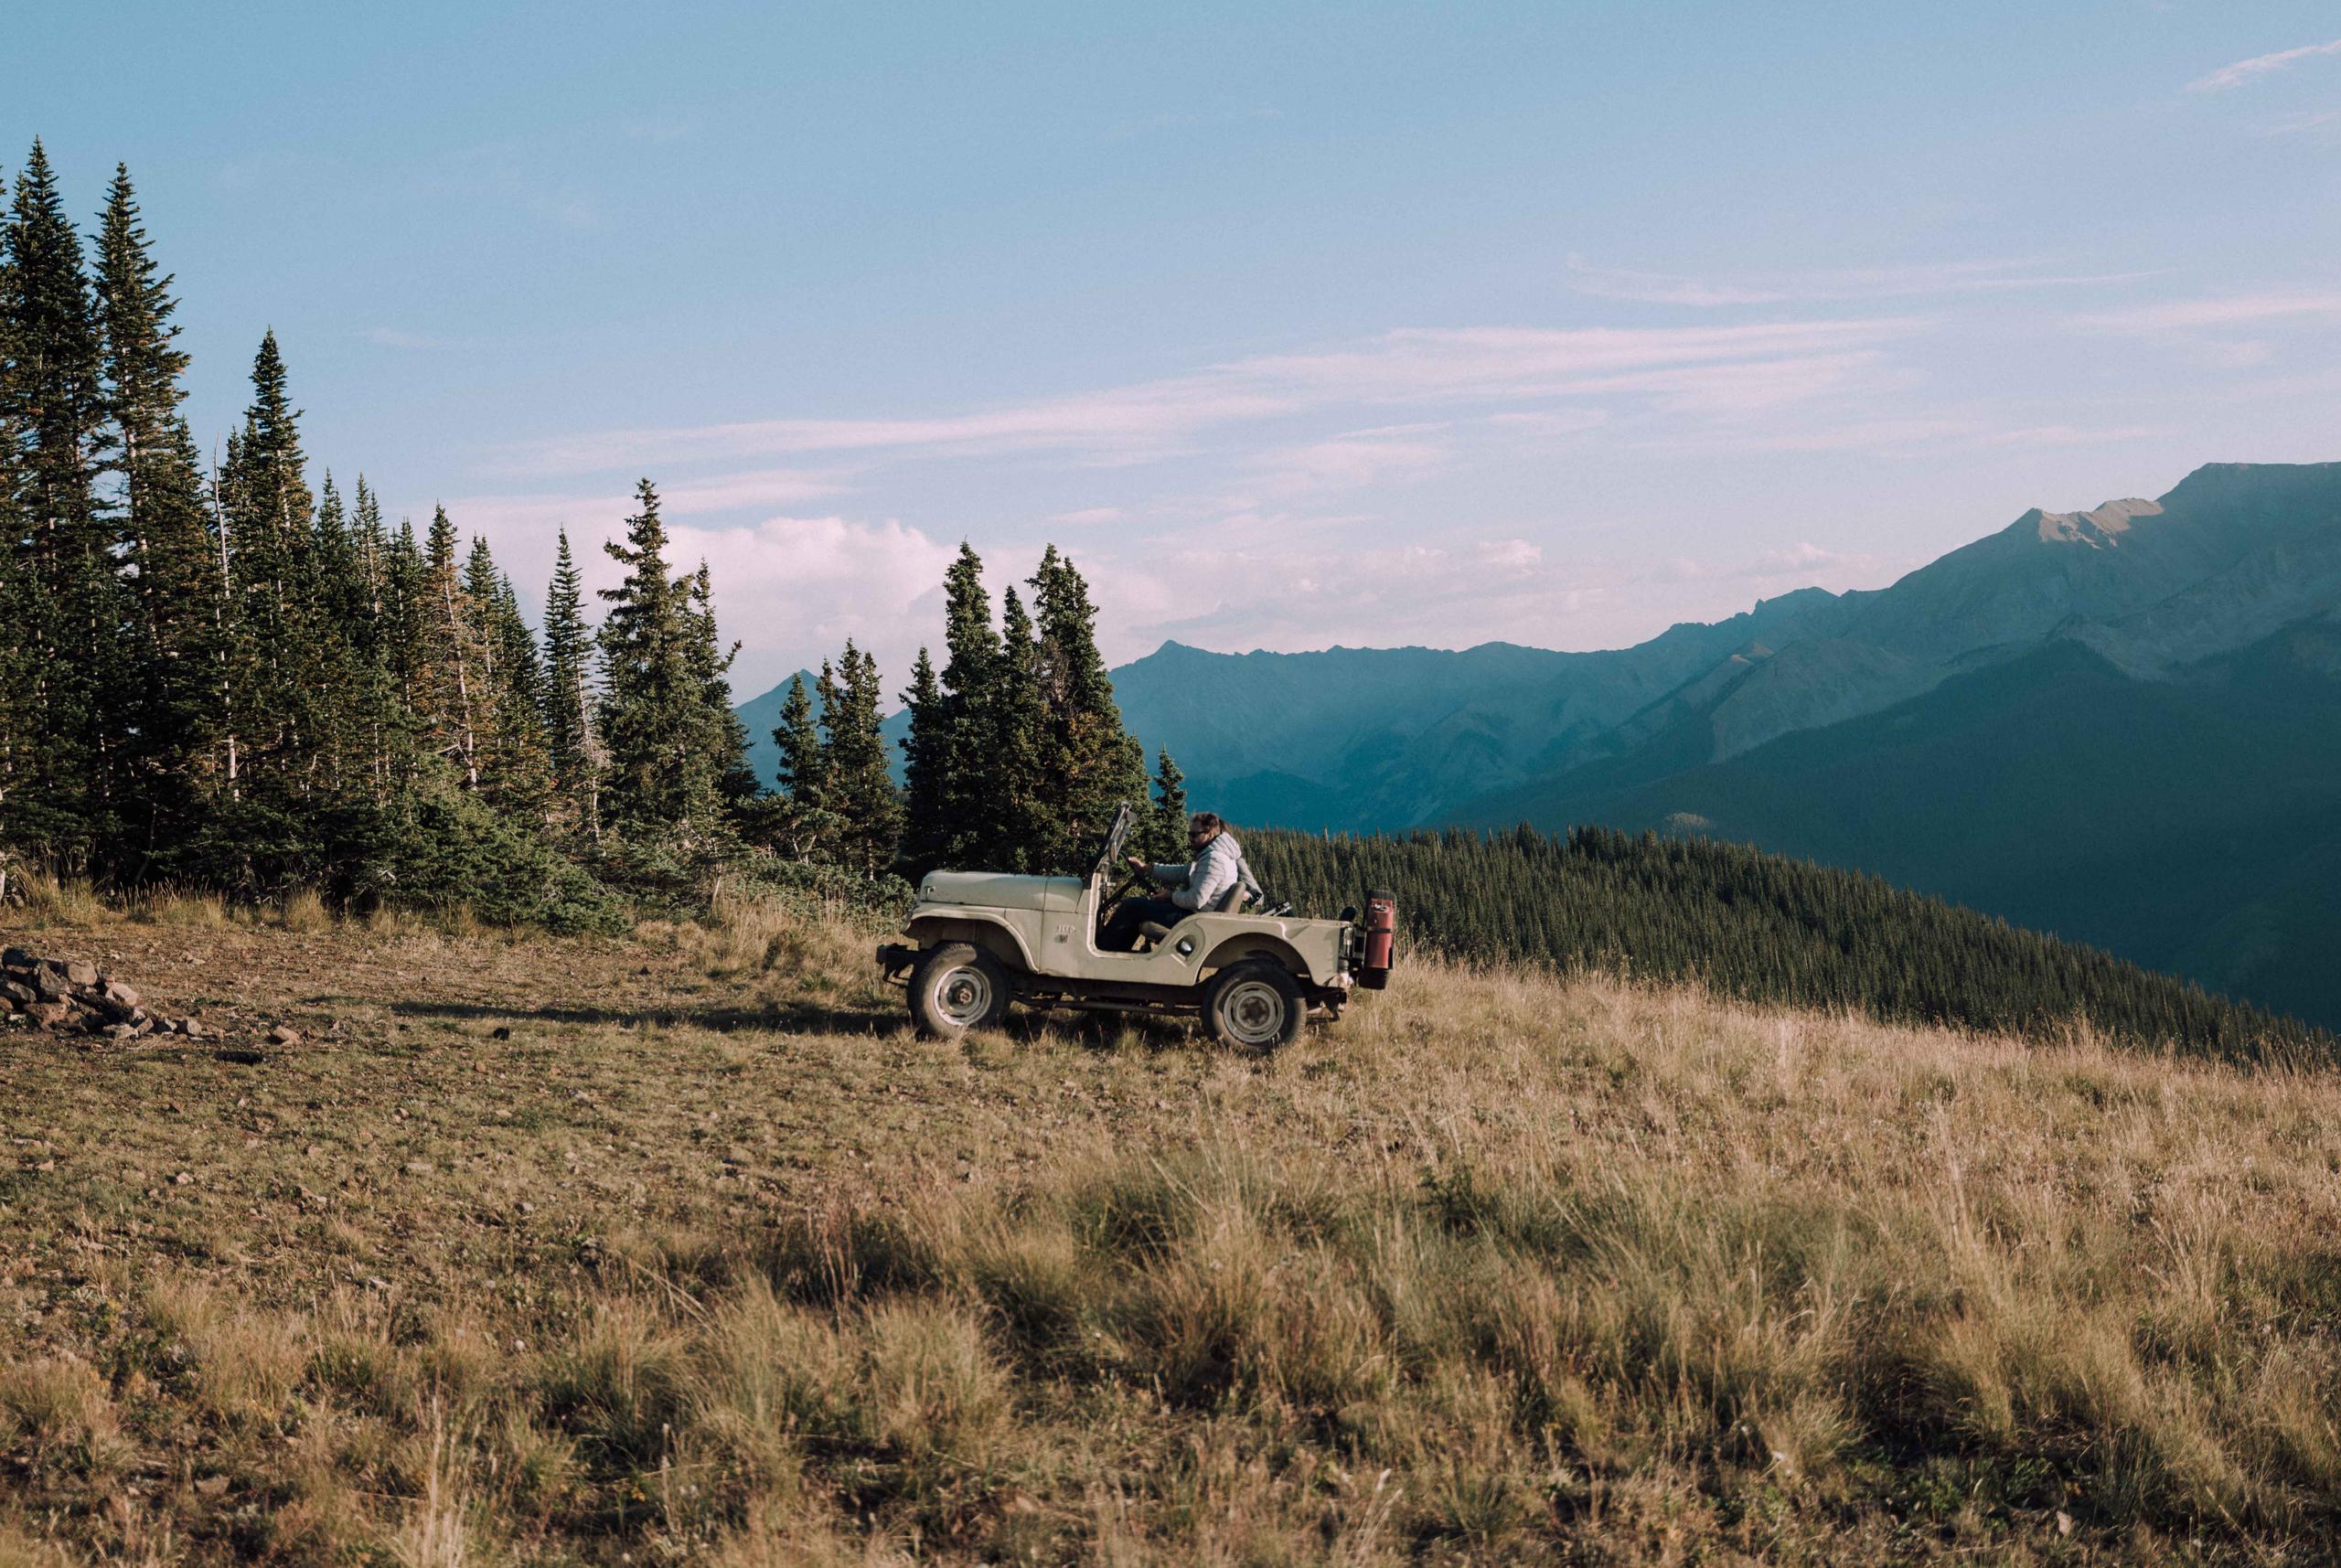 Mountain landscape with man in vintage Jeep